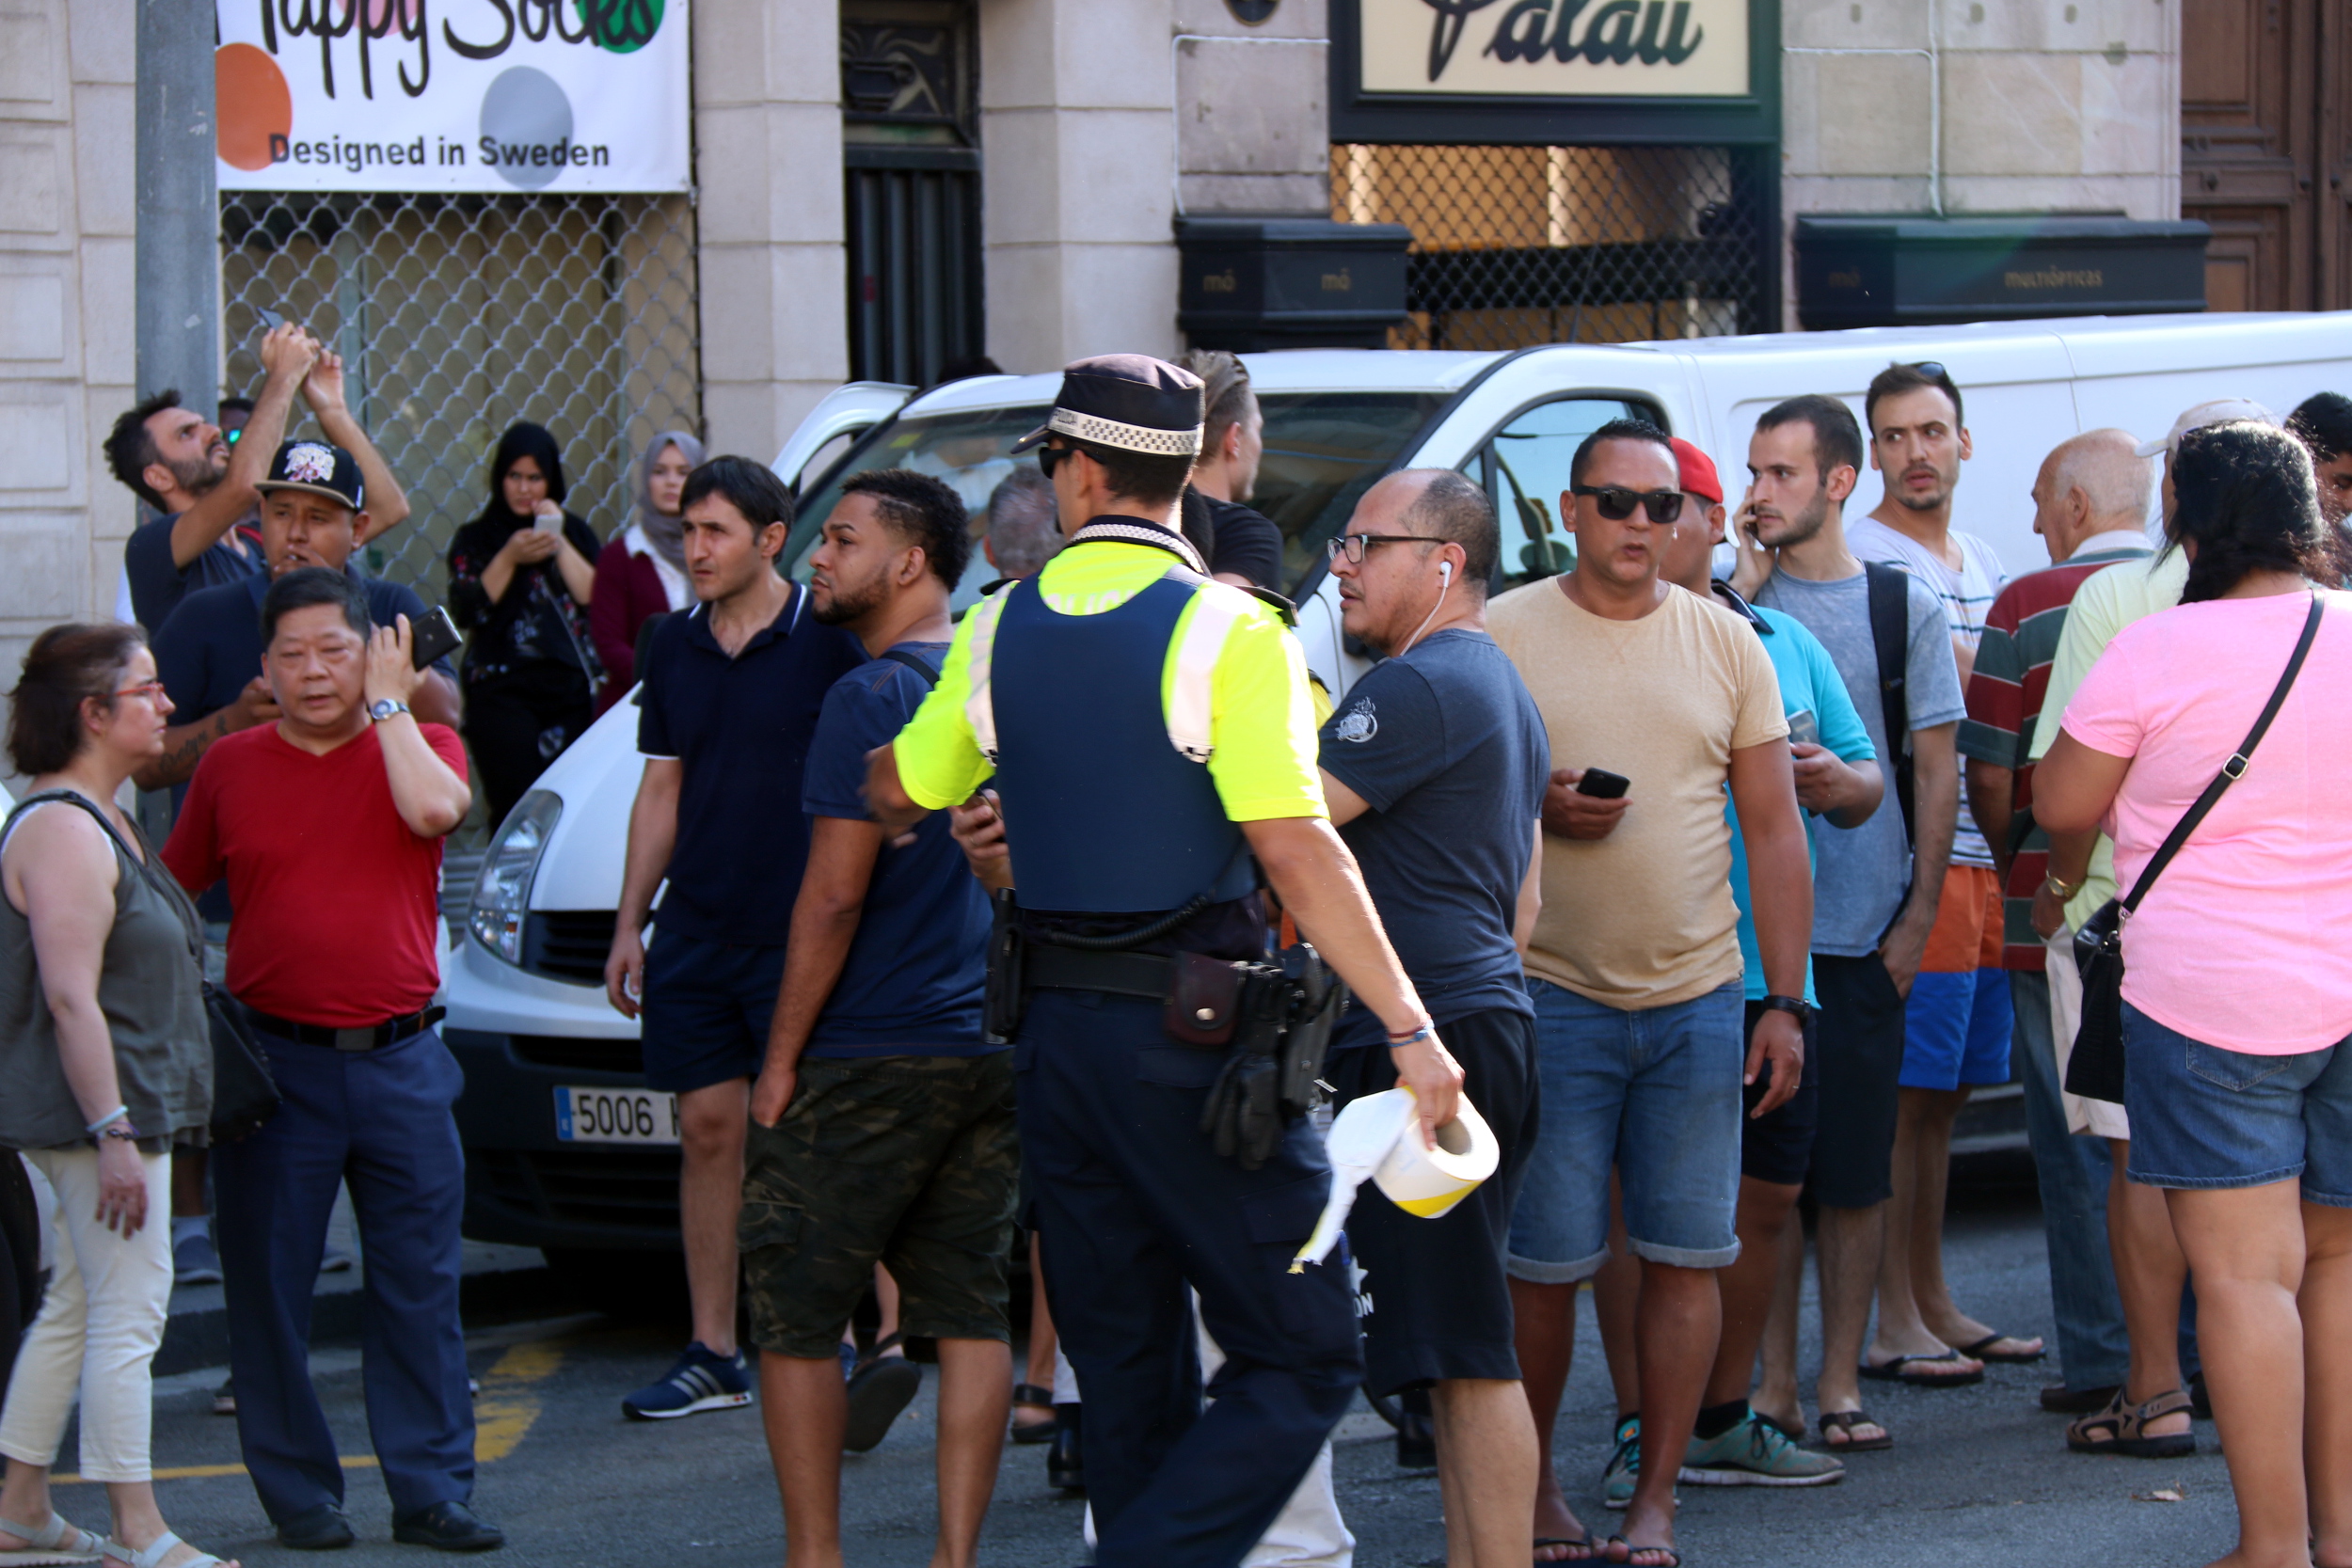 Local Police Mosses d'Esquadra keeping people away from the area (Pere Francesc)